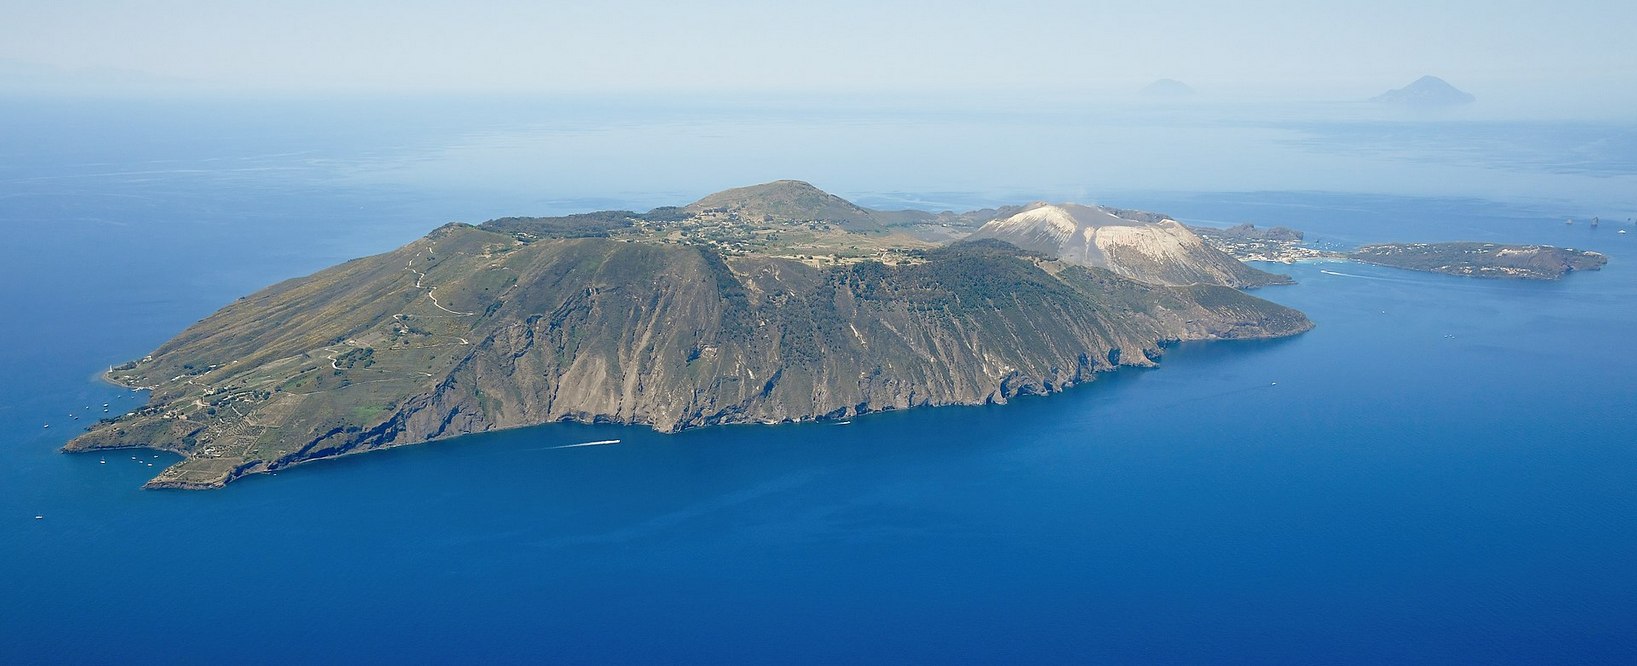 Aerial image of Vulcano view from the east